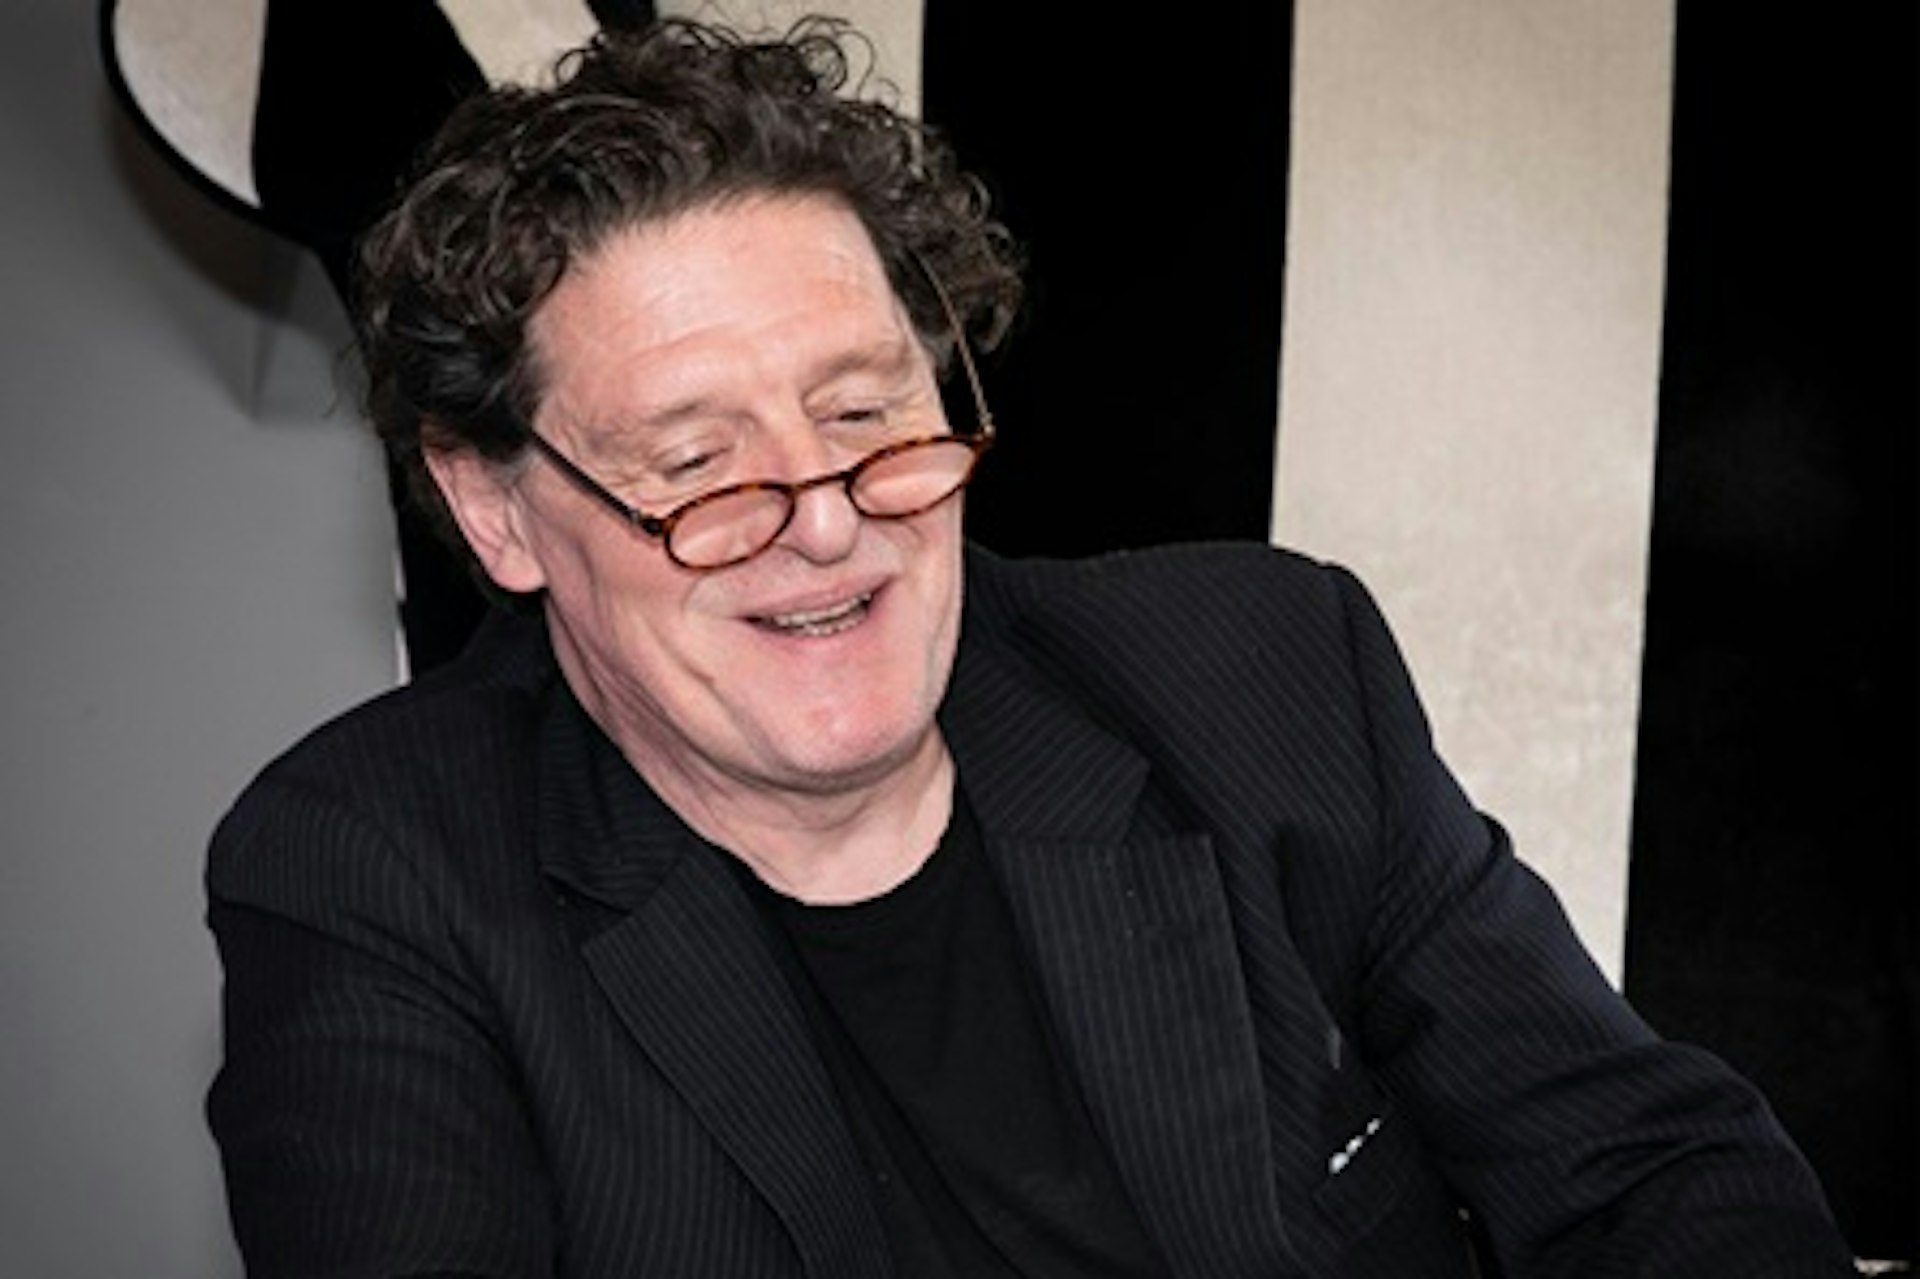 Wine and Dine with Acclaimed Chef Marco Pierre White for Two at the London Steakhouse Co - 22nd February 2022 1